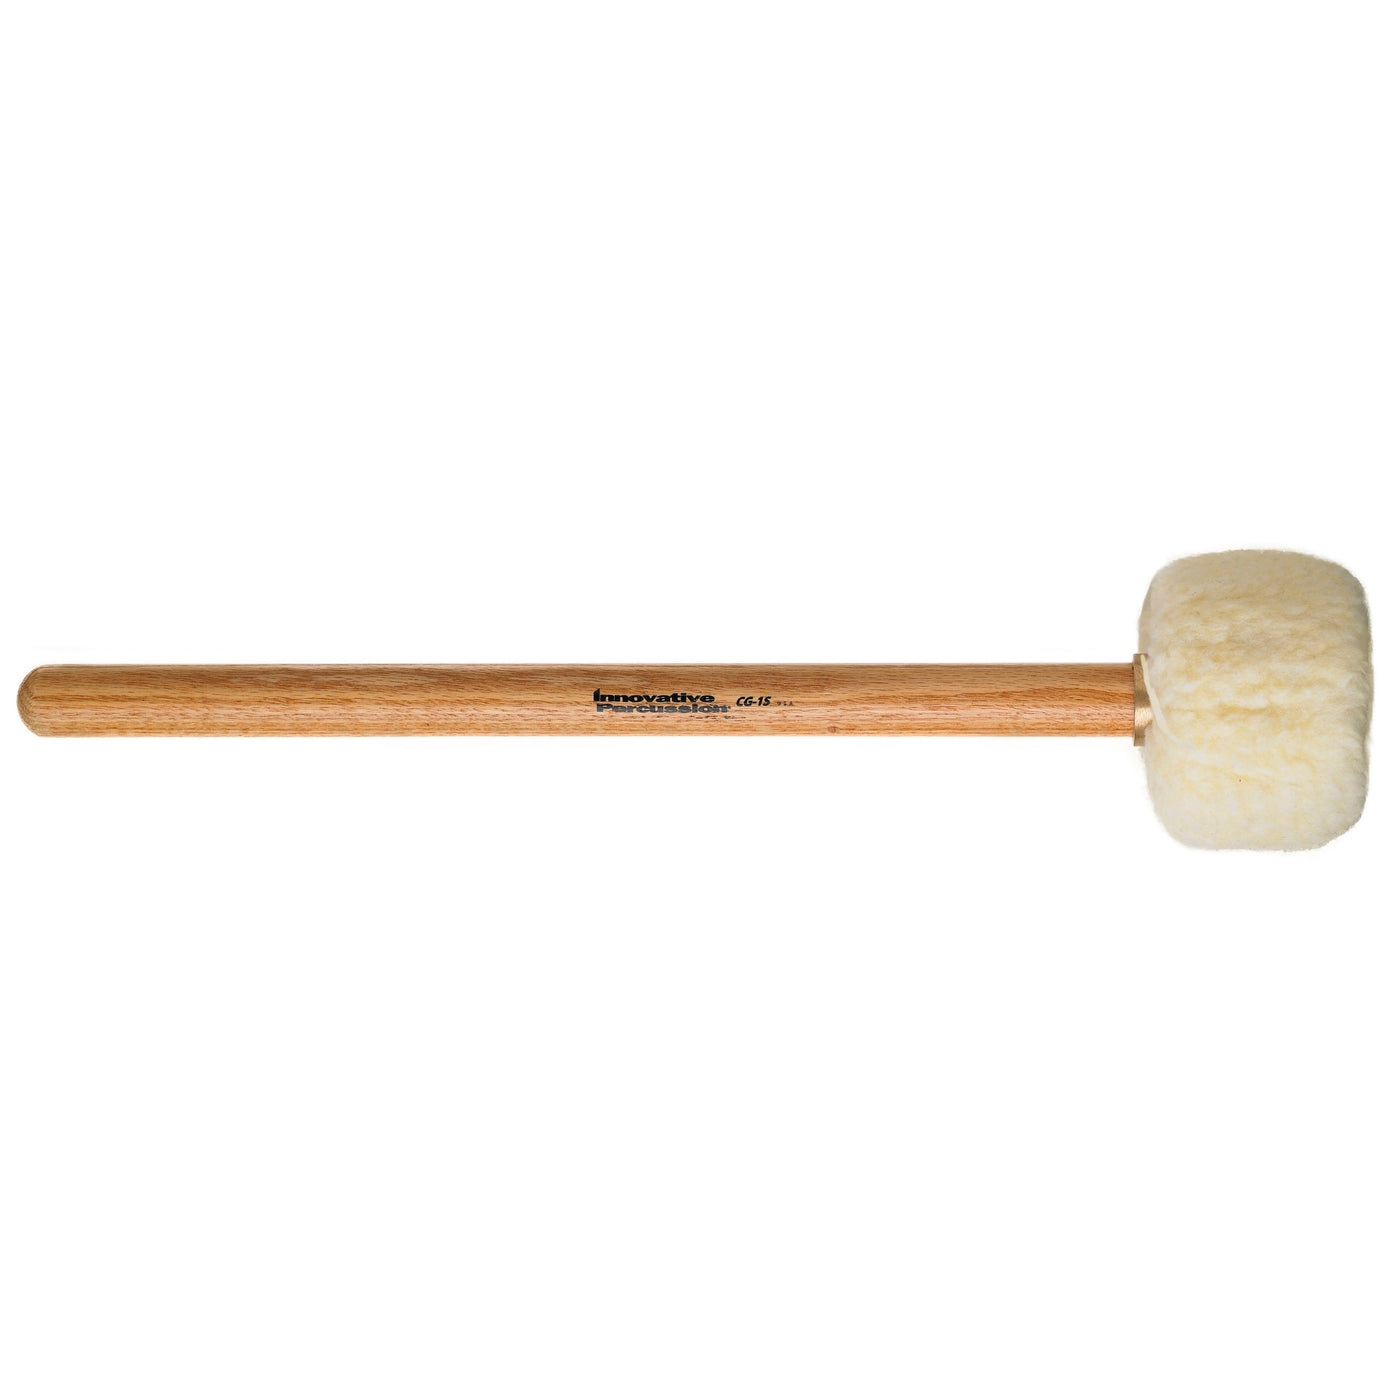 Innovative Percussion CG-2 Gong Mallet